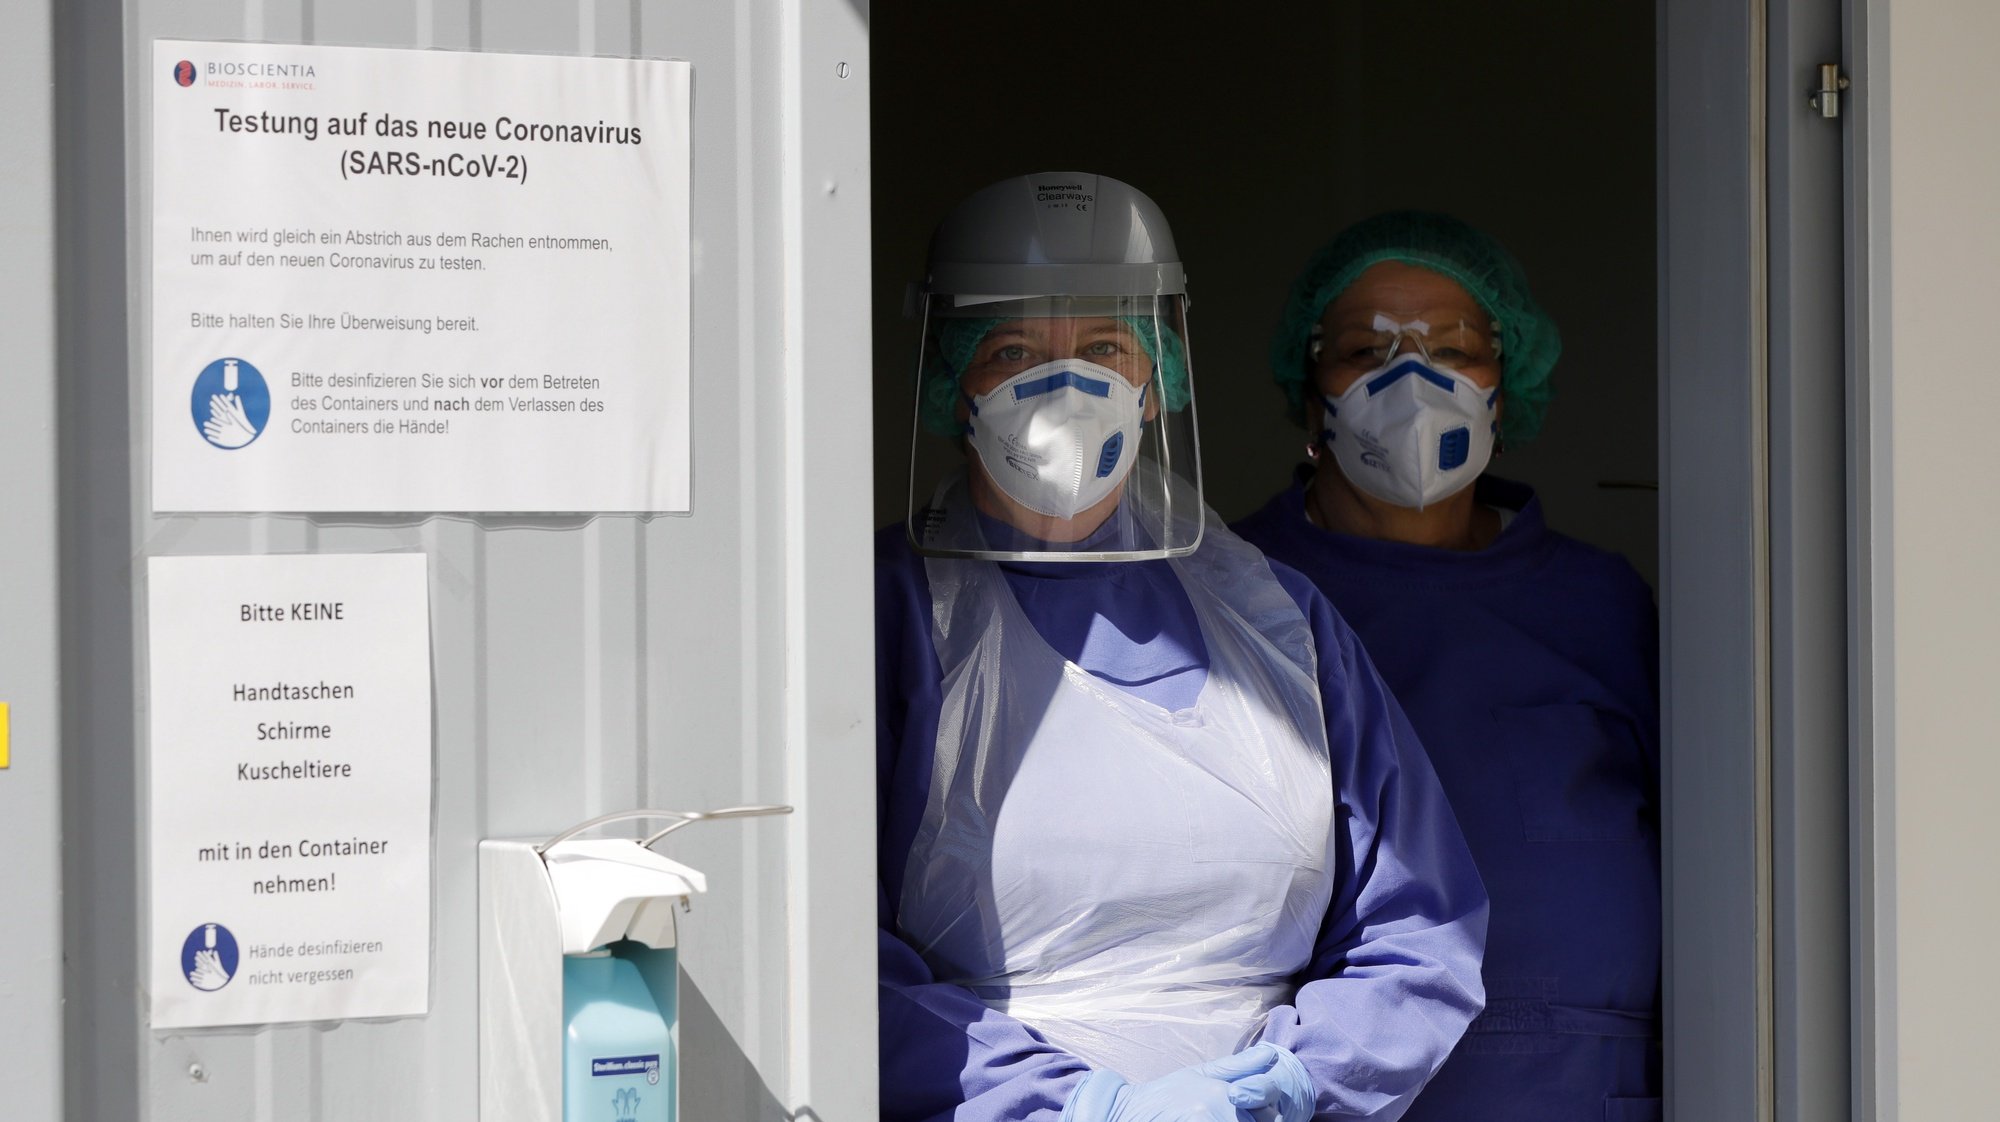 epa08379395 Employees wear protective face masks inside of the Corona smear centre at Bioscientia Healthcare GmbH in Ingelheim, Germany, 23 April 2020. The largest medical laboratory in Rhineland-Palatinate, Bioscientia Healthcare GmbH in Ingelheim, is one of the performance centres for corona diagnostics in Germany. In the laboratory in Ingelheim, up to 3,500 PCR examinations for the coronavirus are carried out daily. Countries around the world are taking increased measures to stem the widespread of the SARS-CoV-2 coronavirus which causes the Covid-19 disease.  EPA/RONALD WITTEK